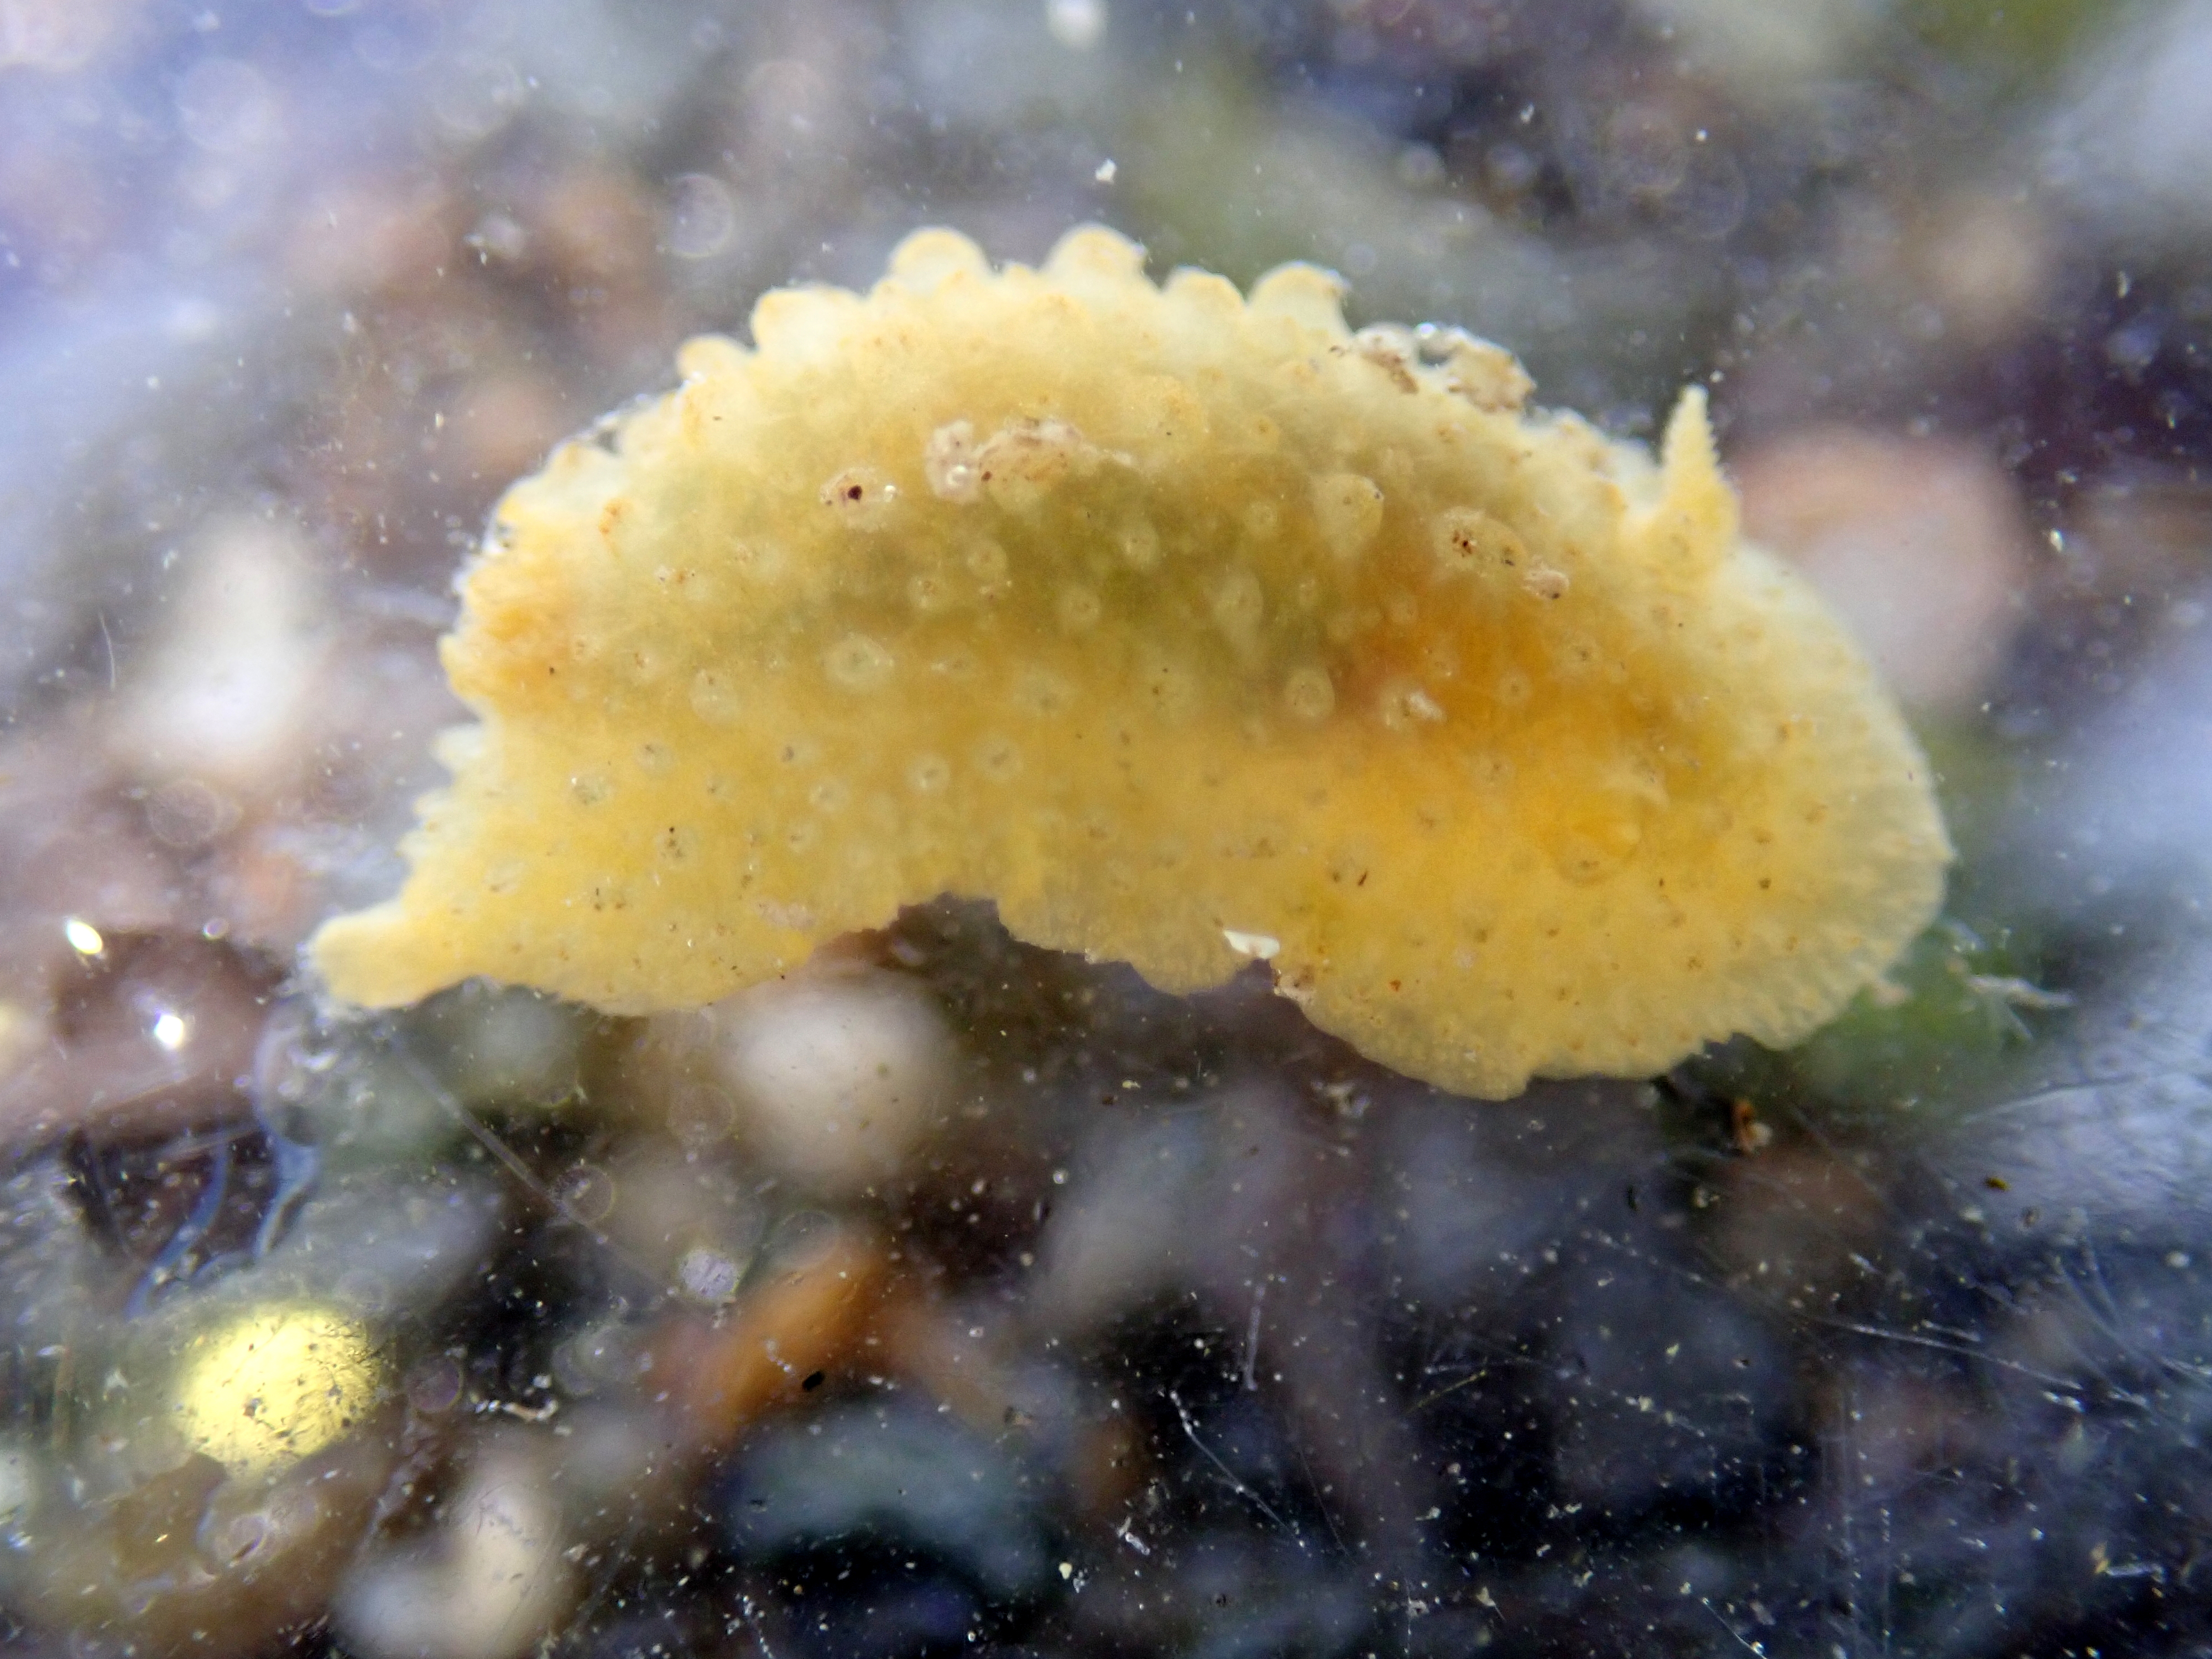 Doris ocelligera sea slug - I recorded these for the first time a couple of months ago and have found them regularly in the same spot this summer.